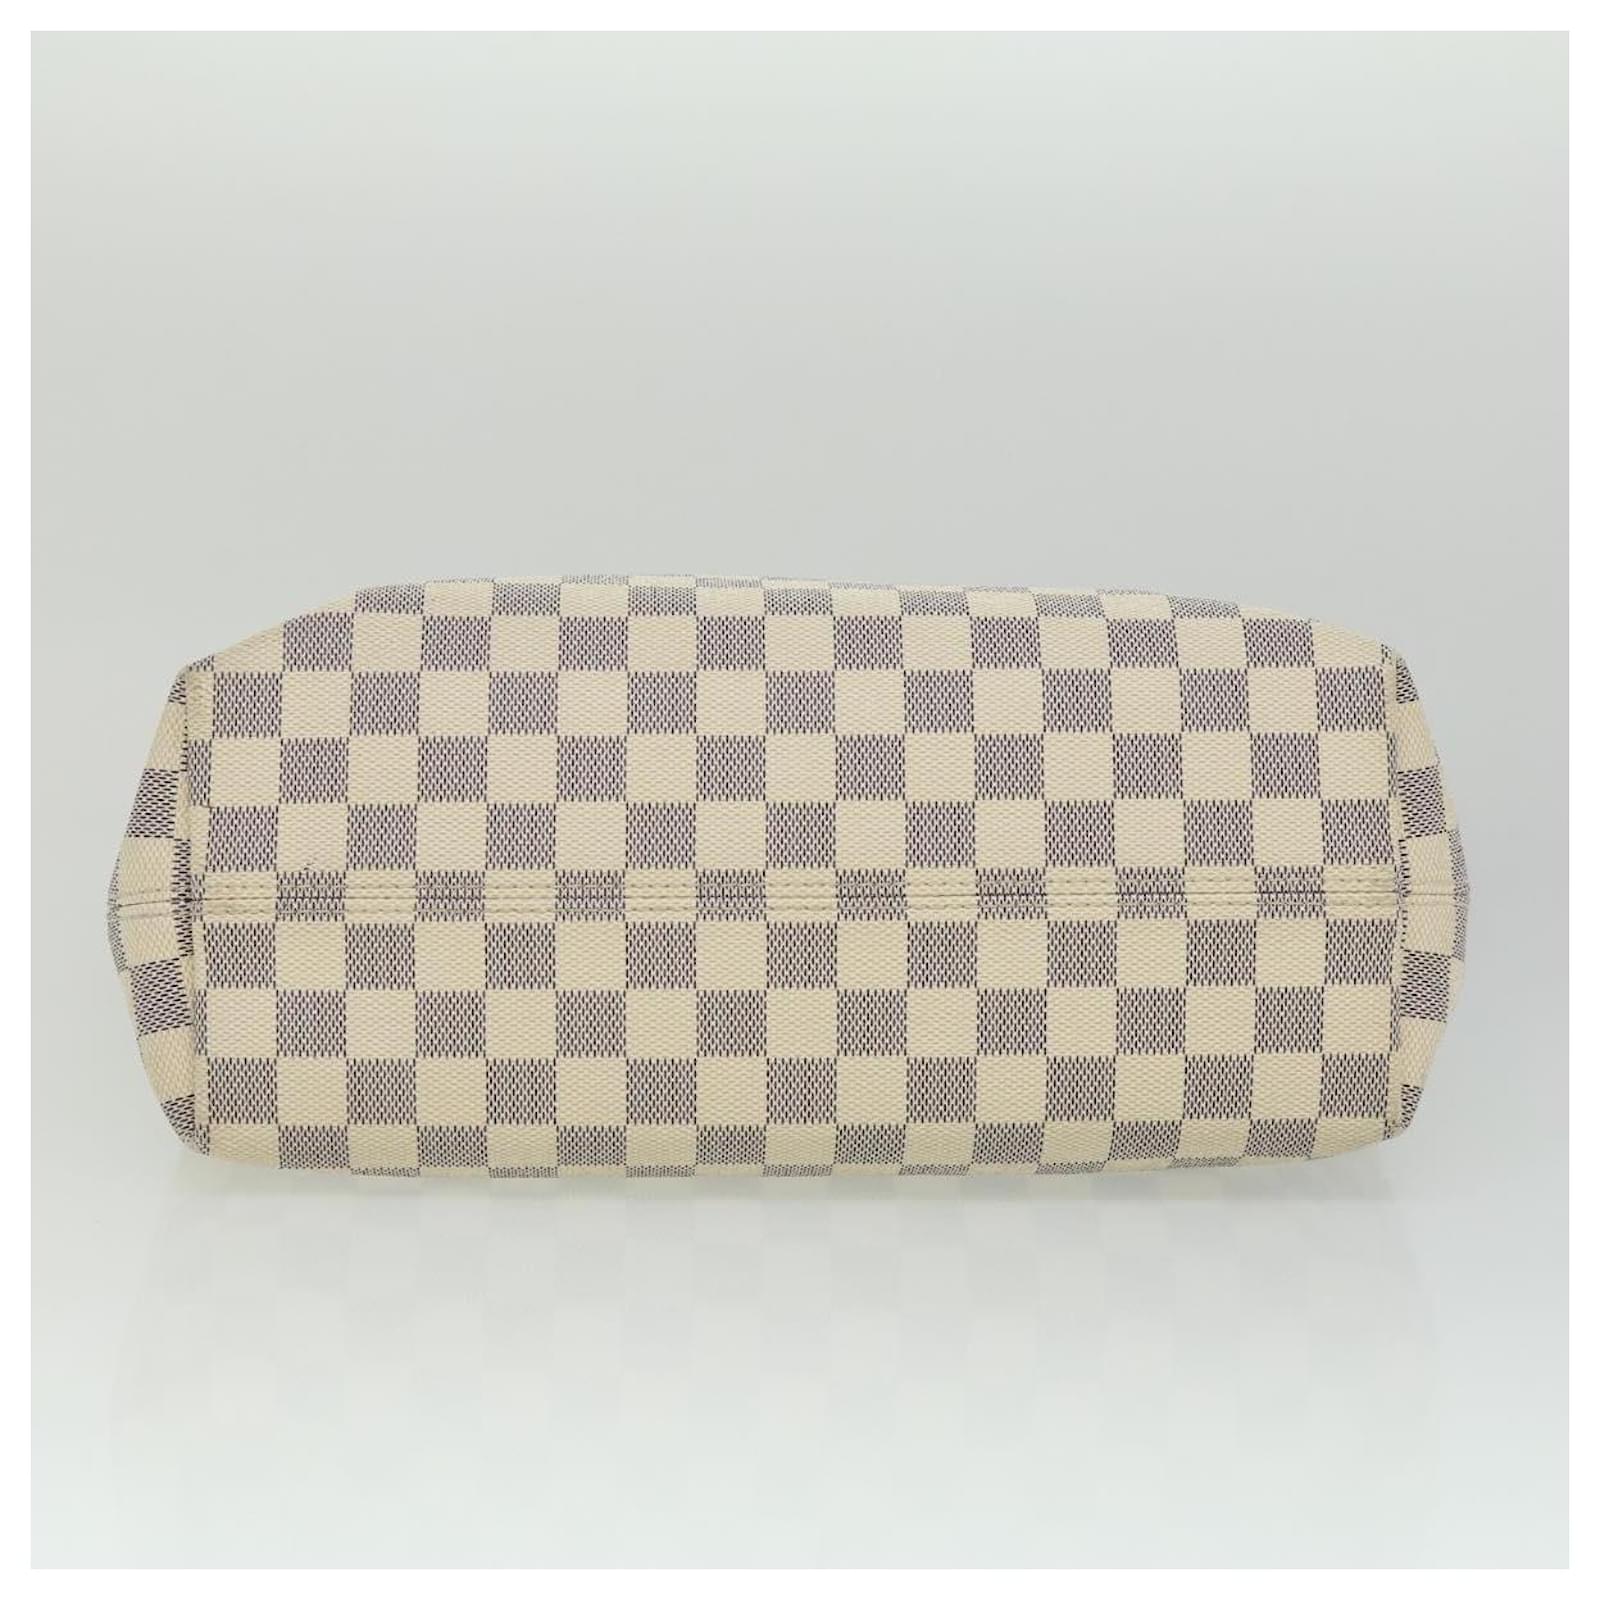 Louis Vuitton Damier Azur Graceful MM N42233 is spacious and can